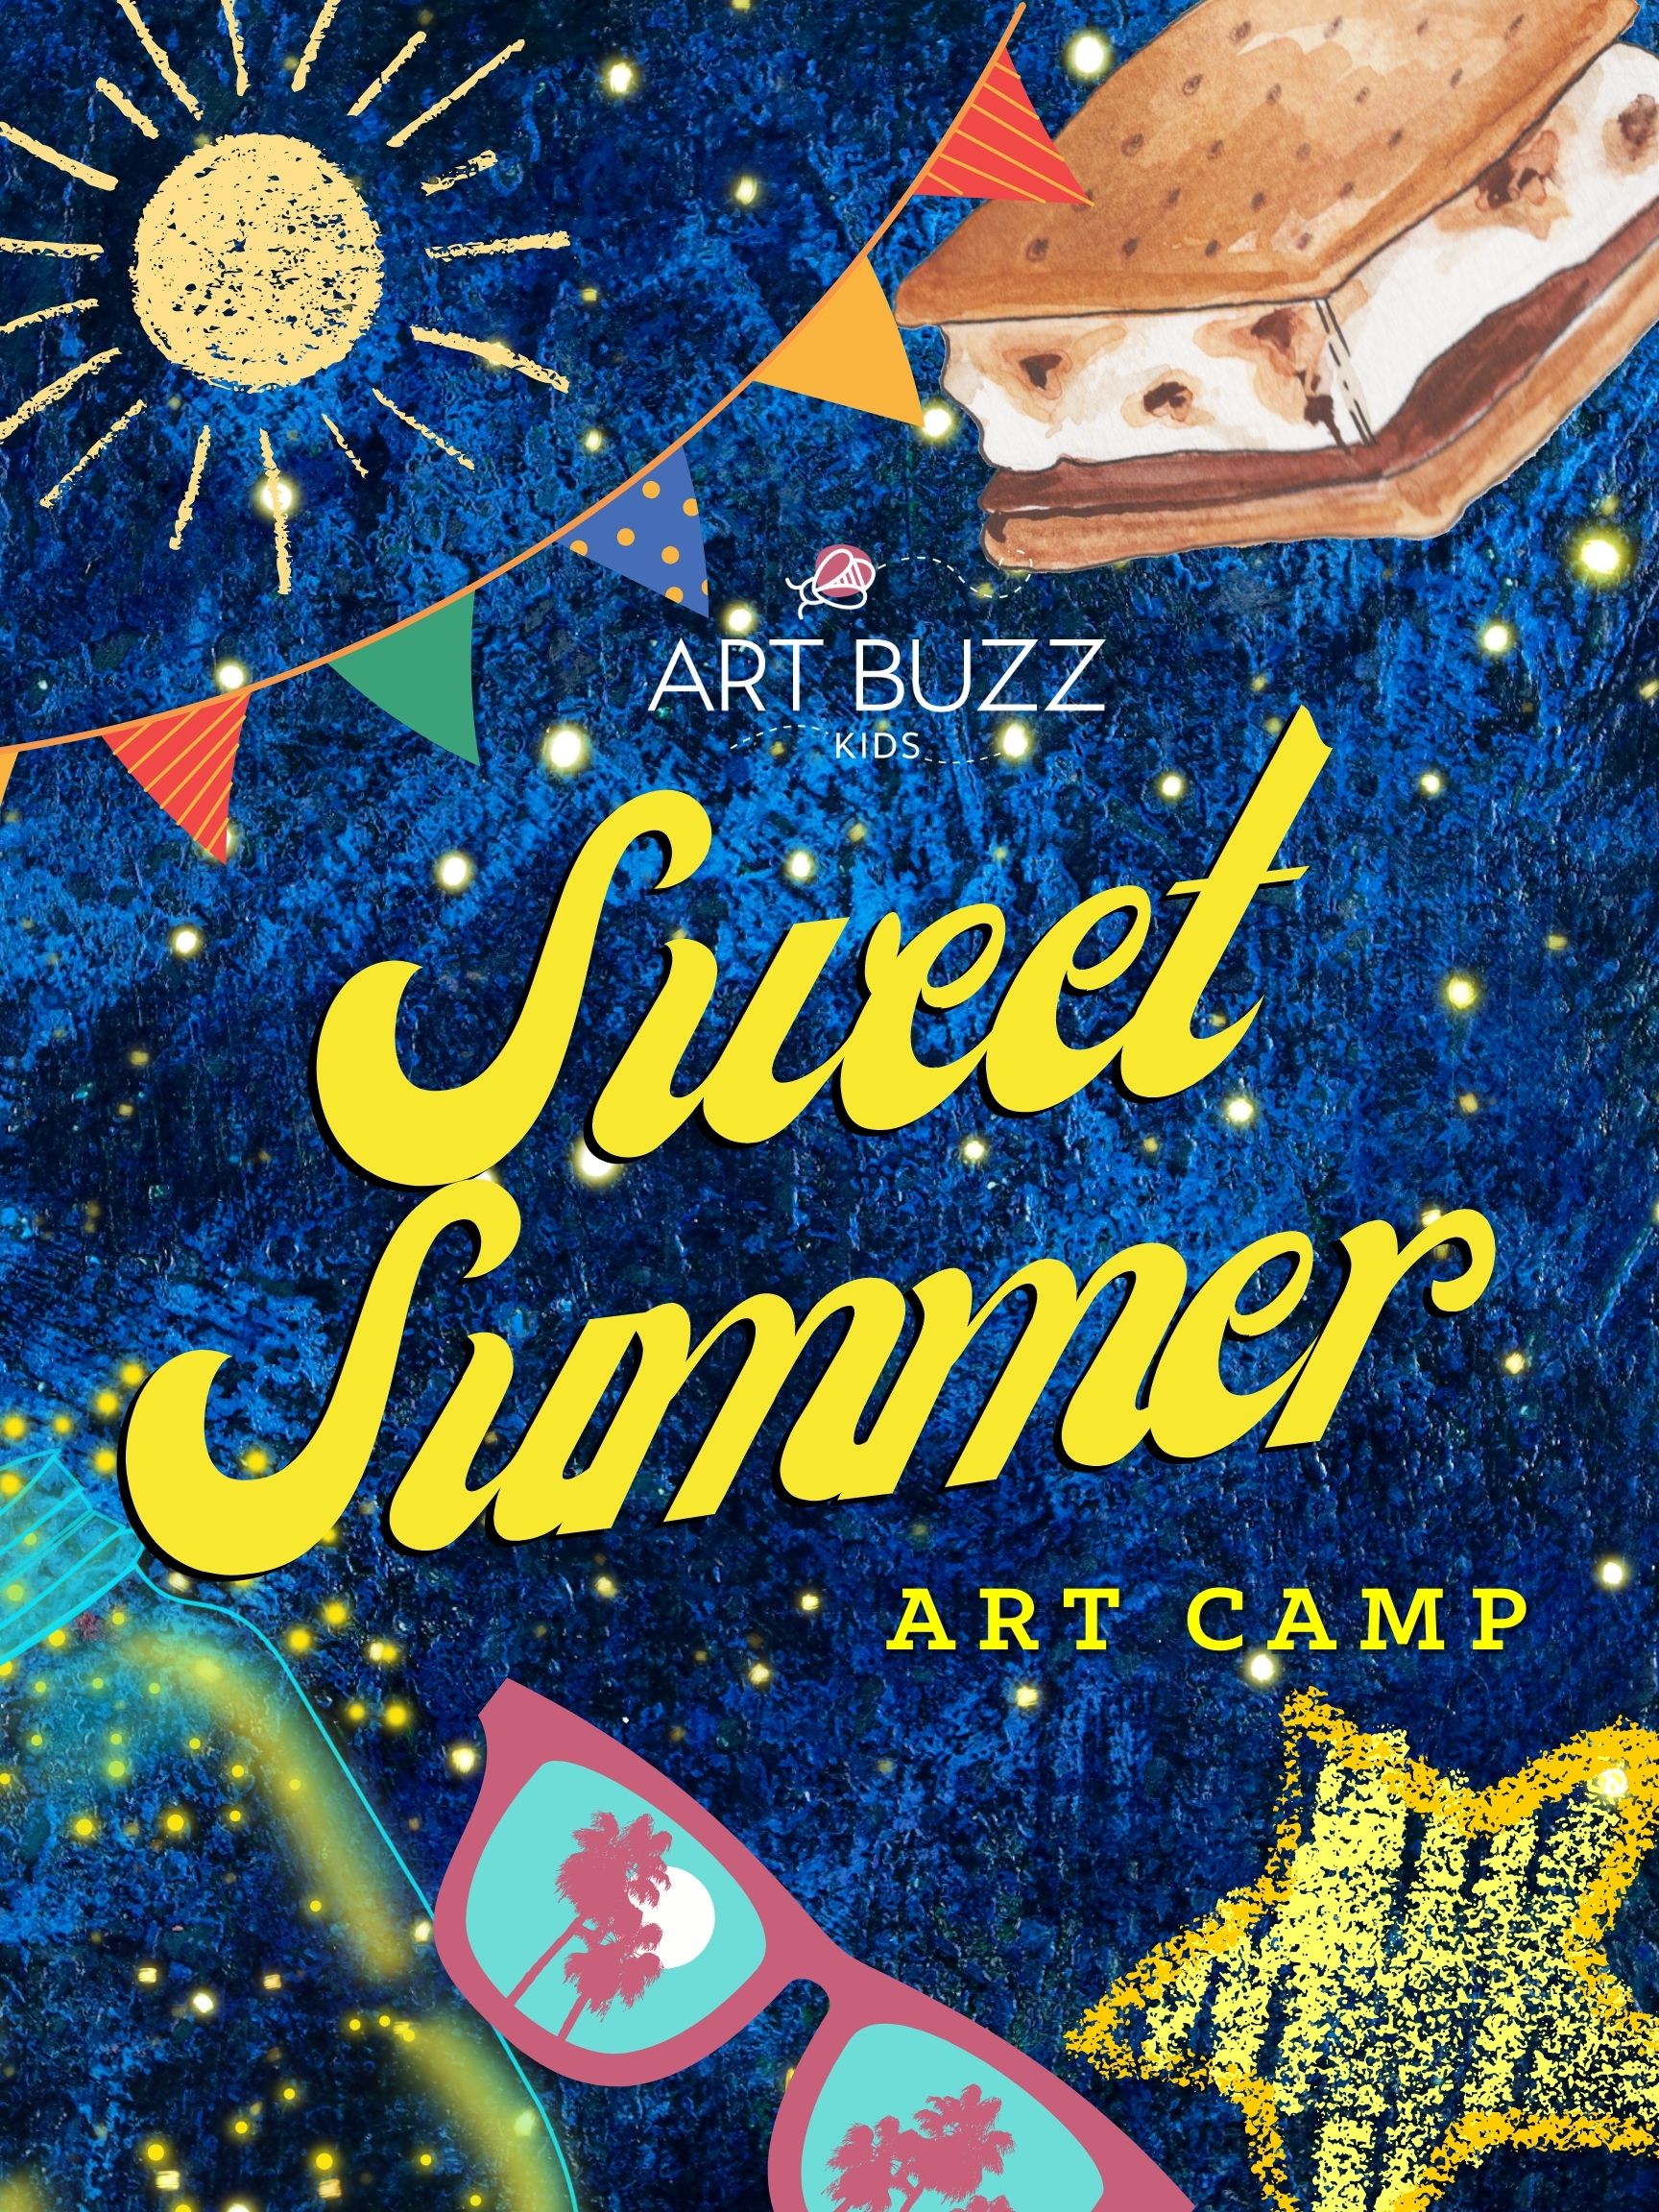 Summer Art Camp - Afternoon Session: Sweet Summer